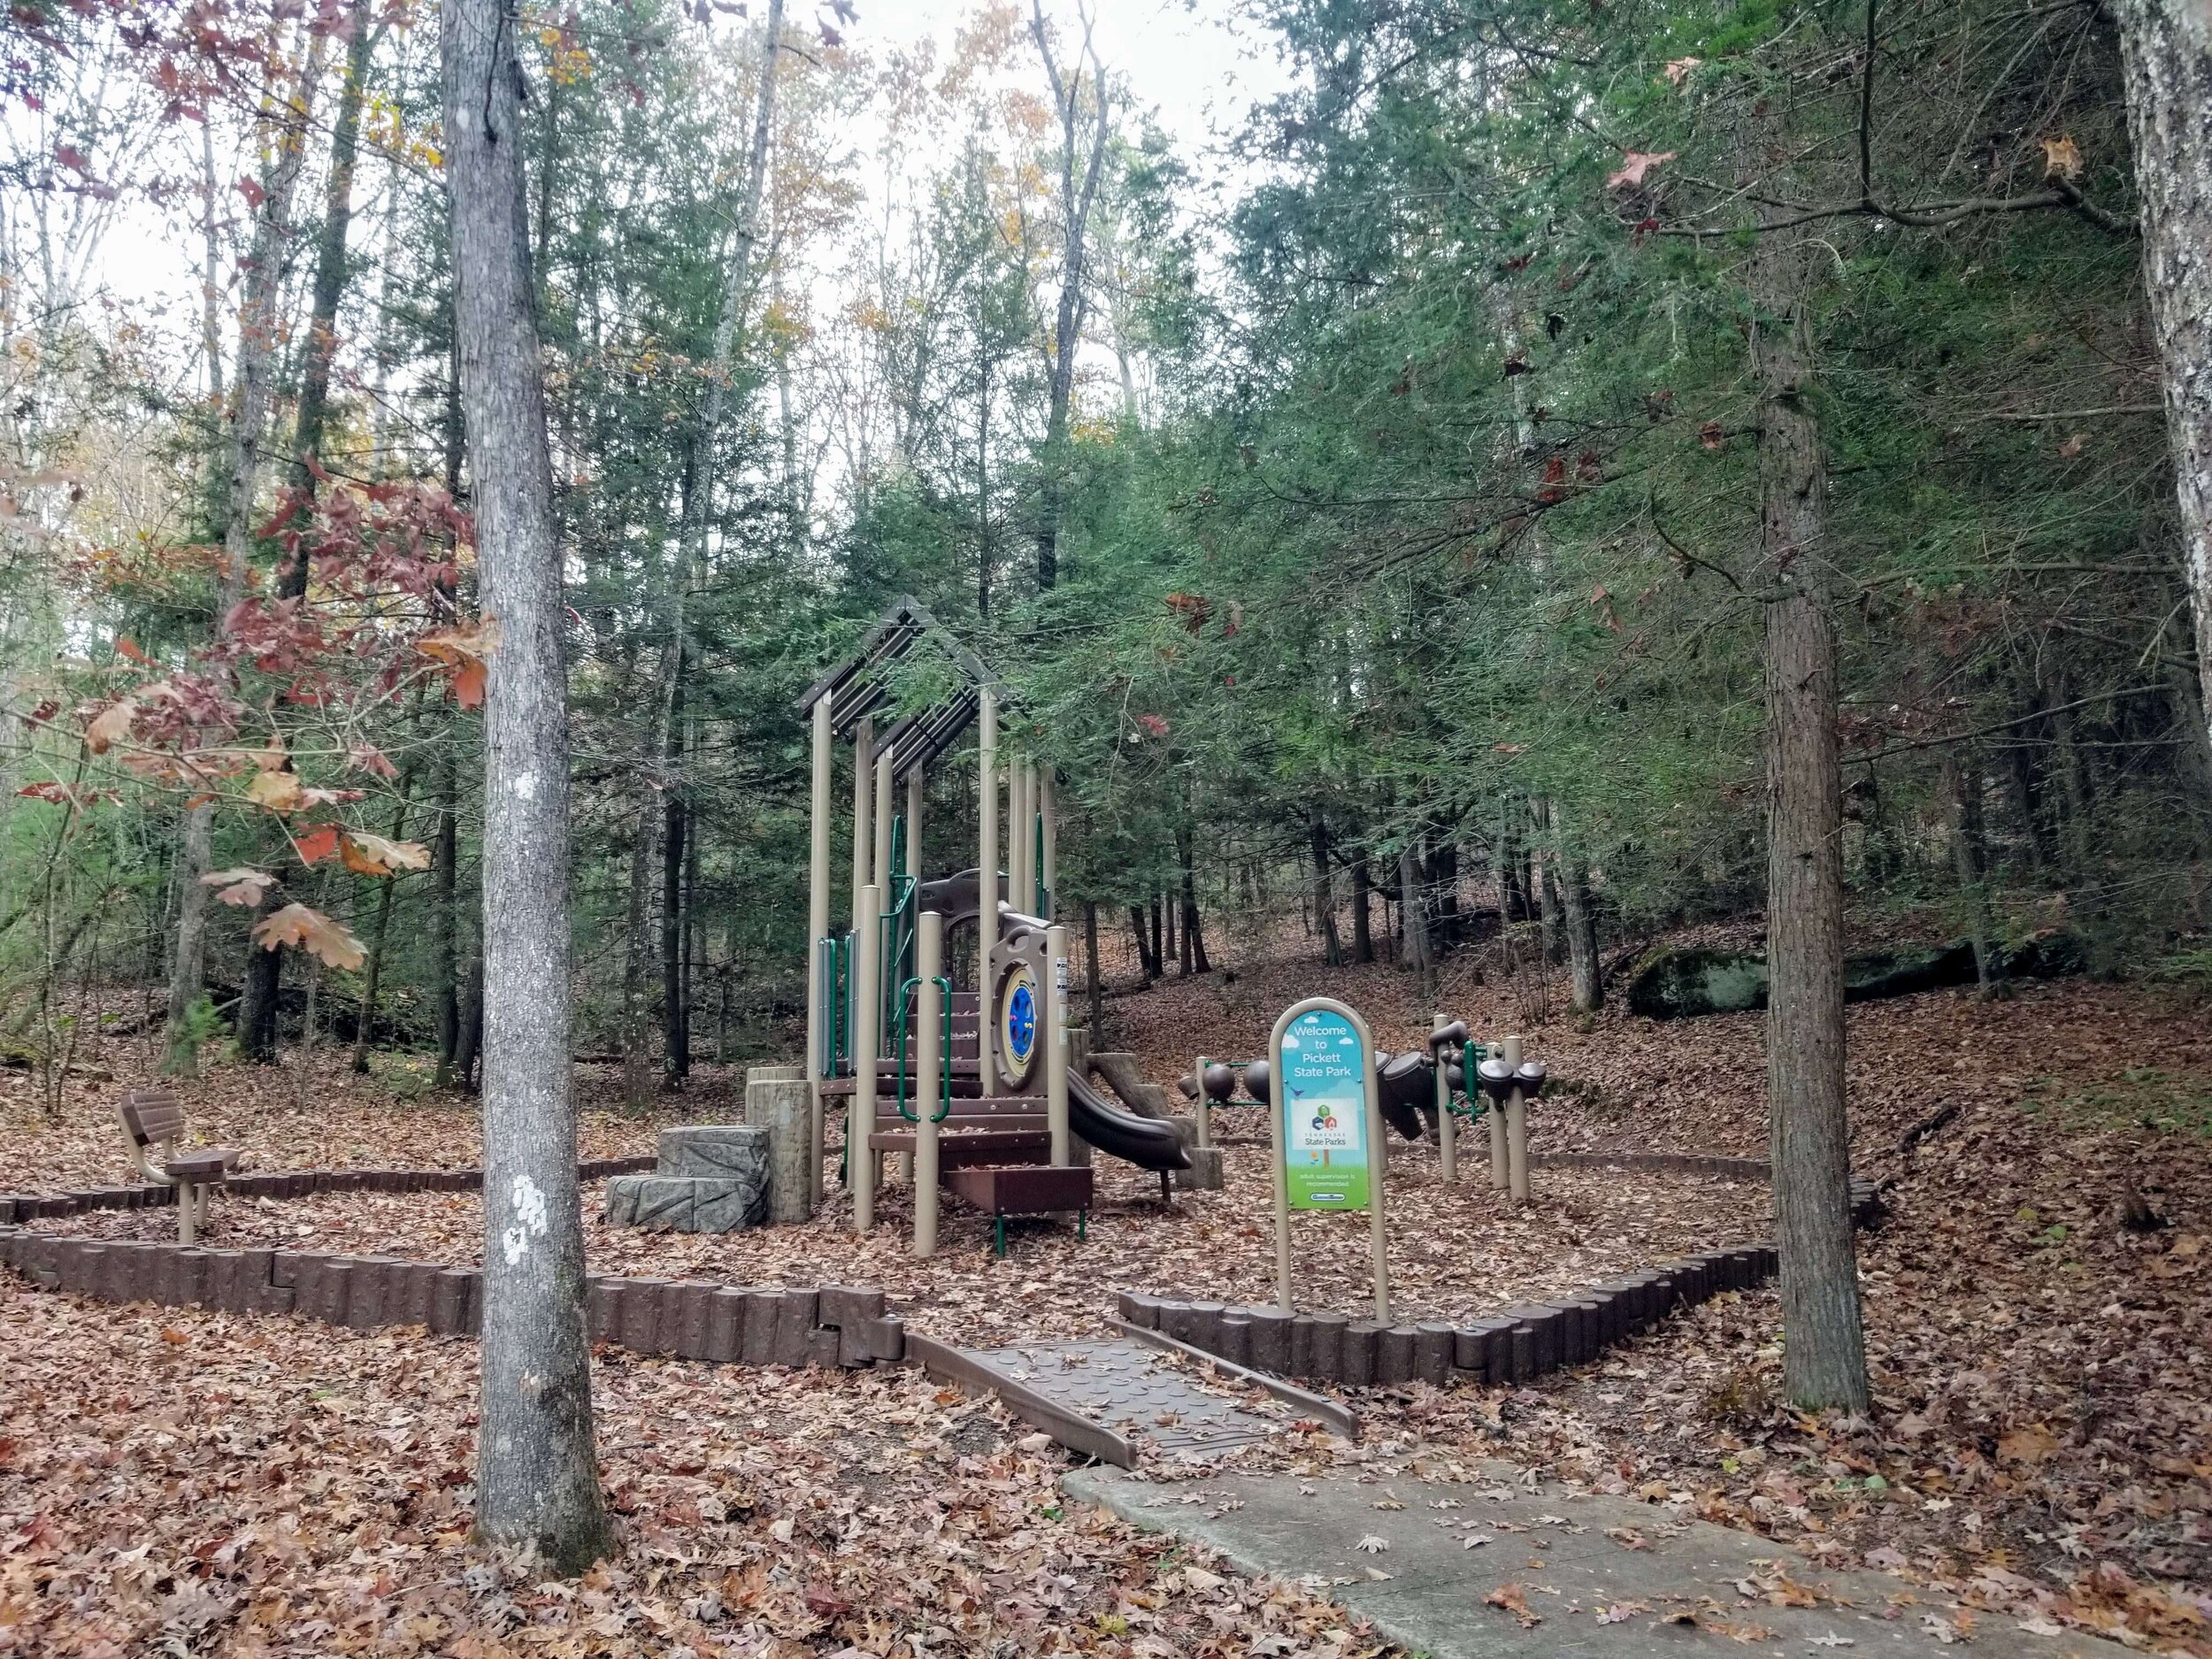 Playground at the picnic area